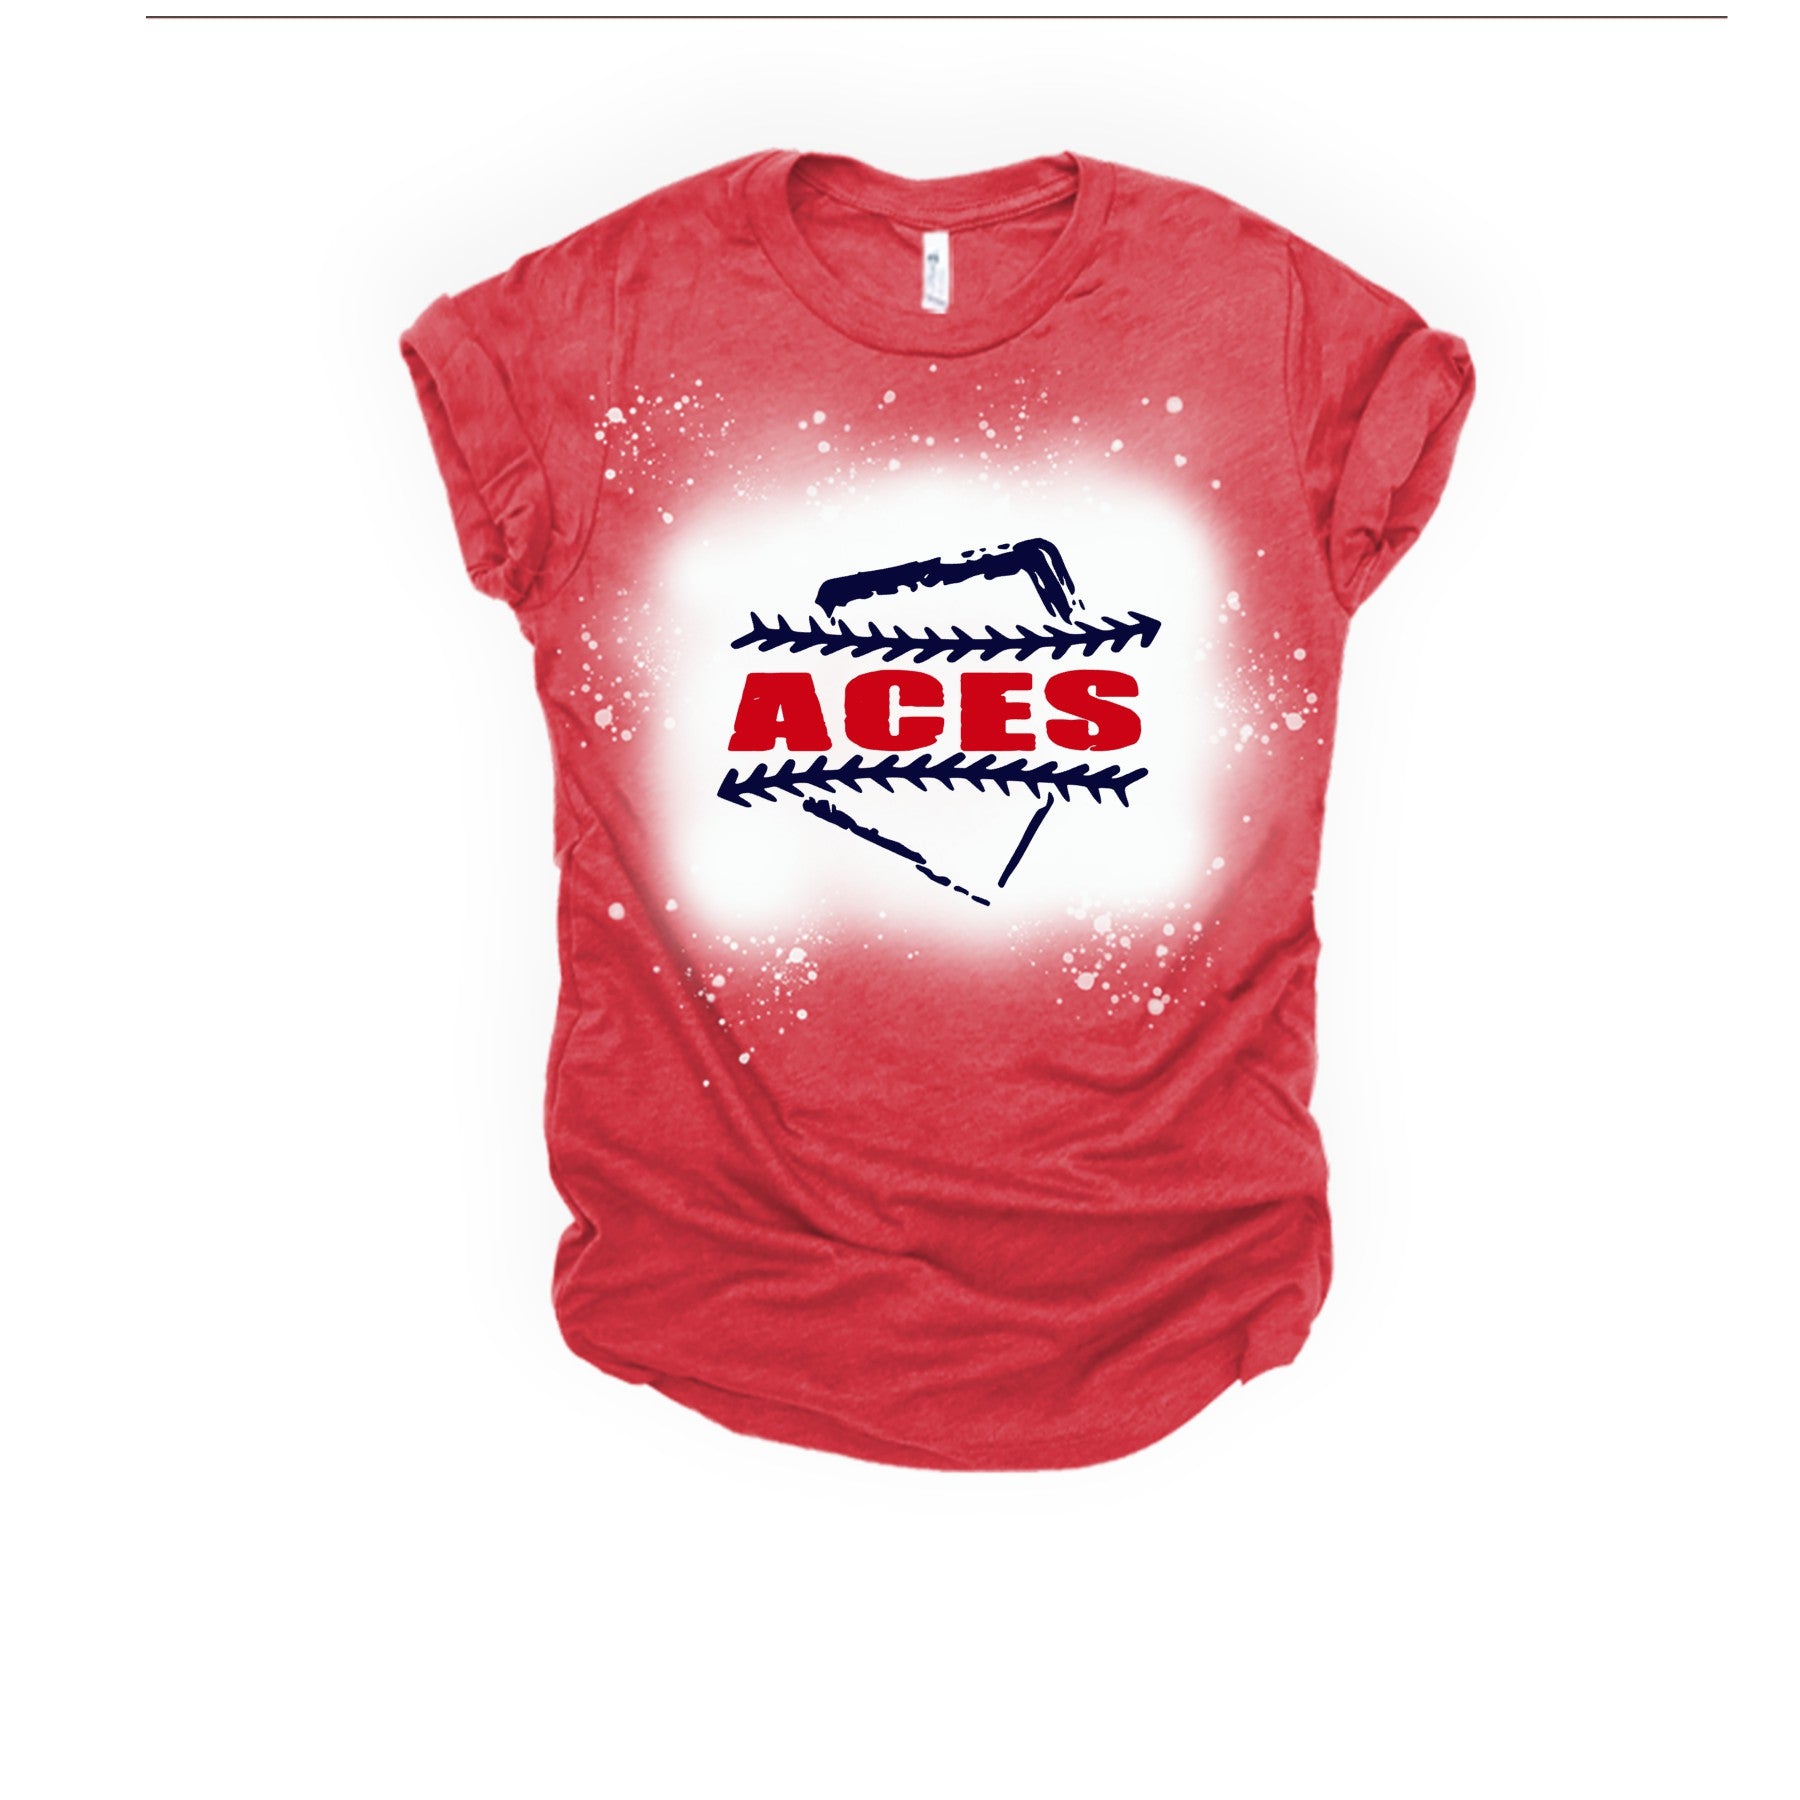 Aces Homes Plate Bleached Shirt - Red